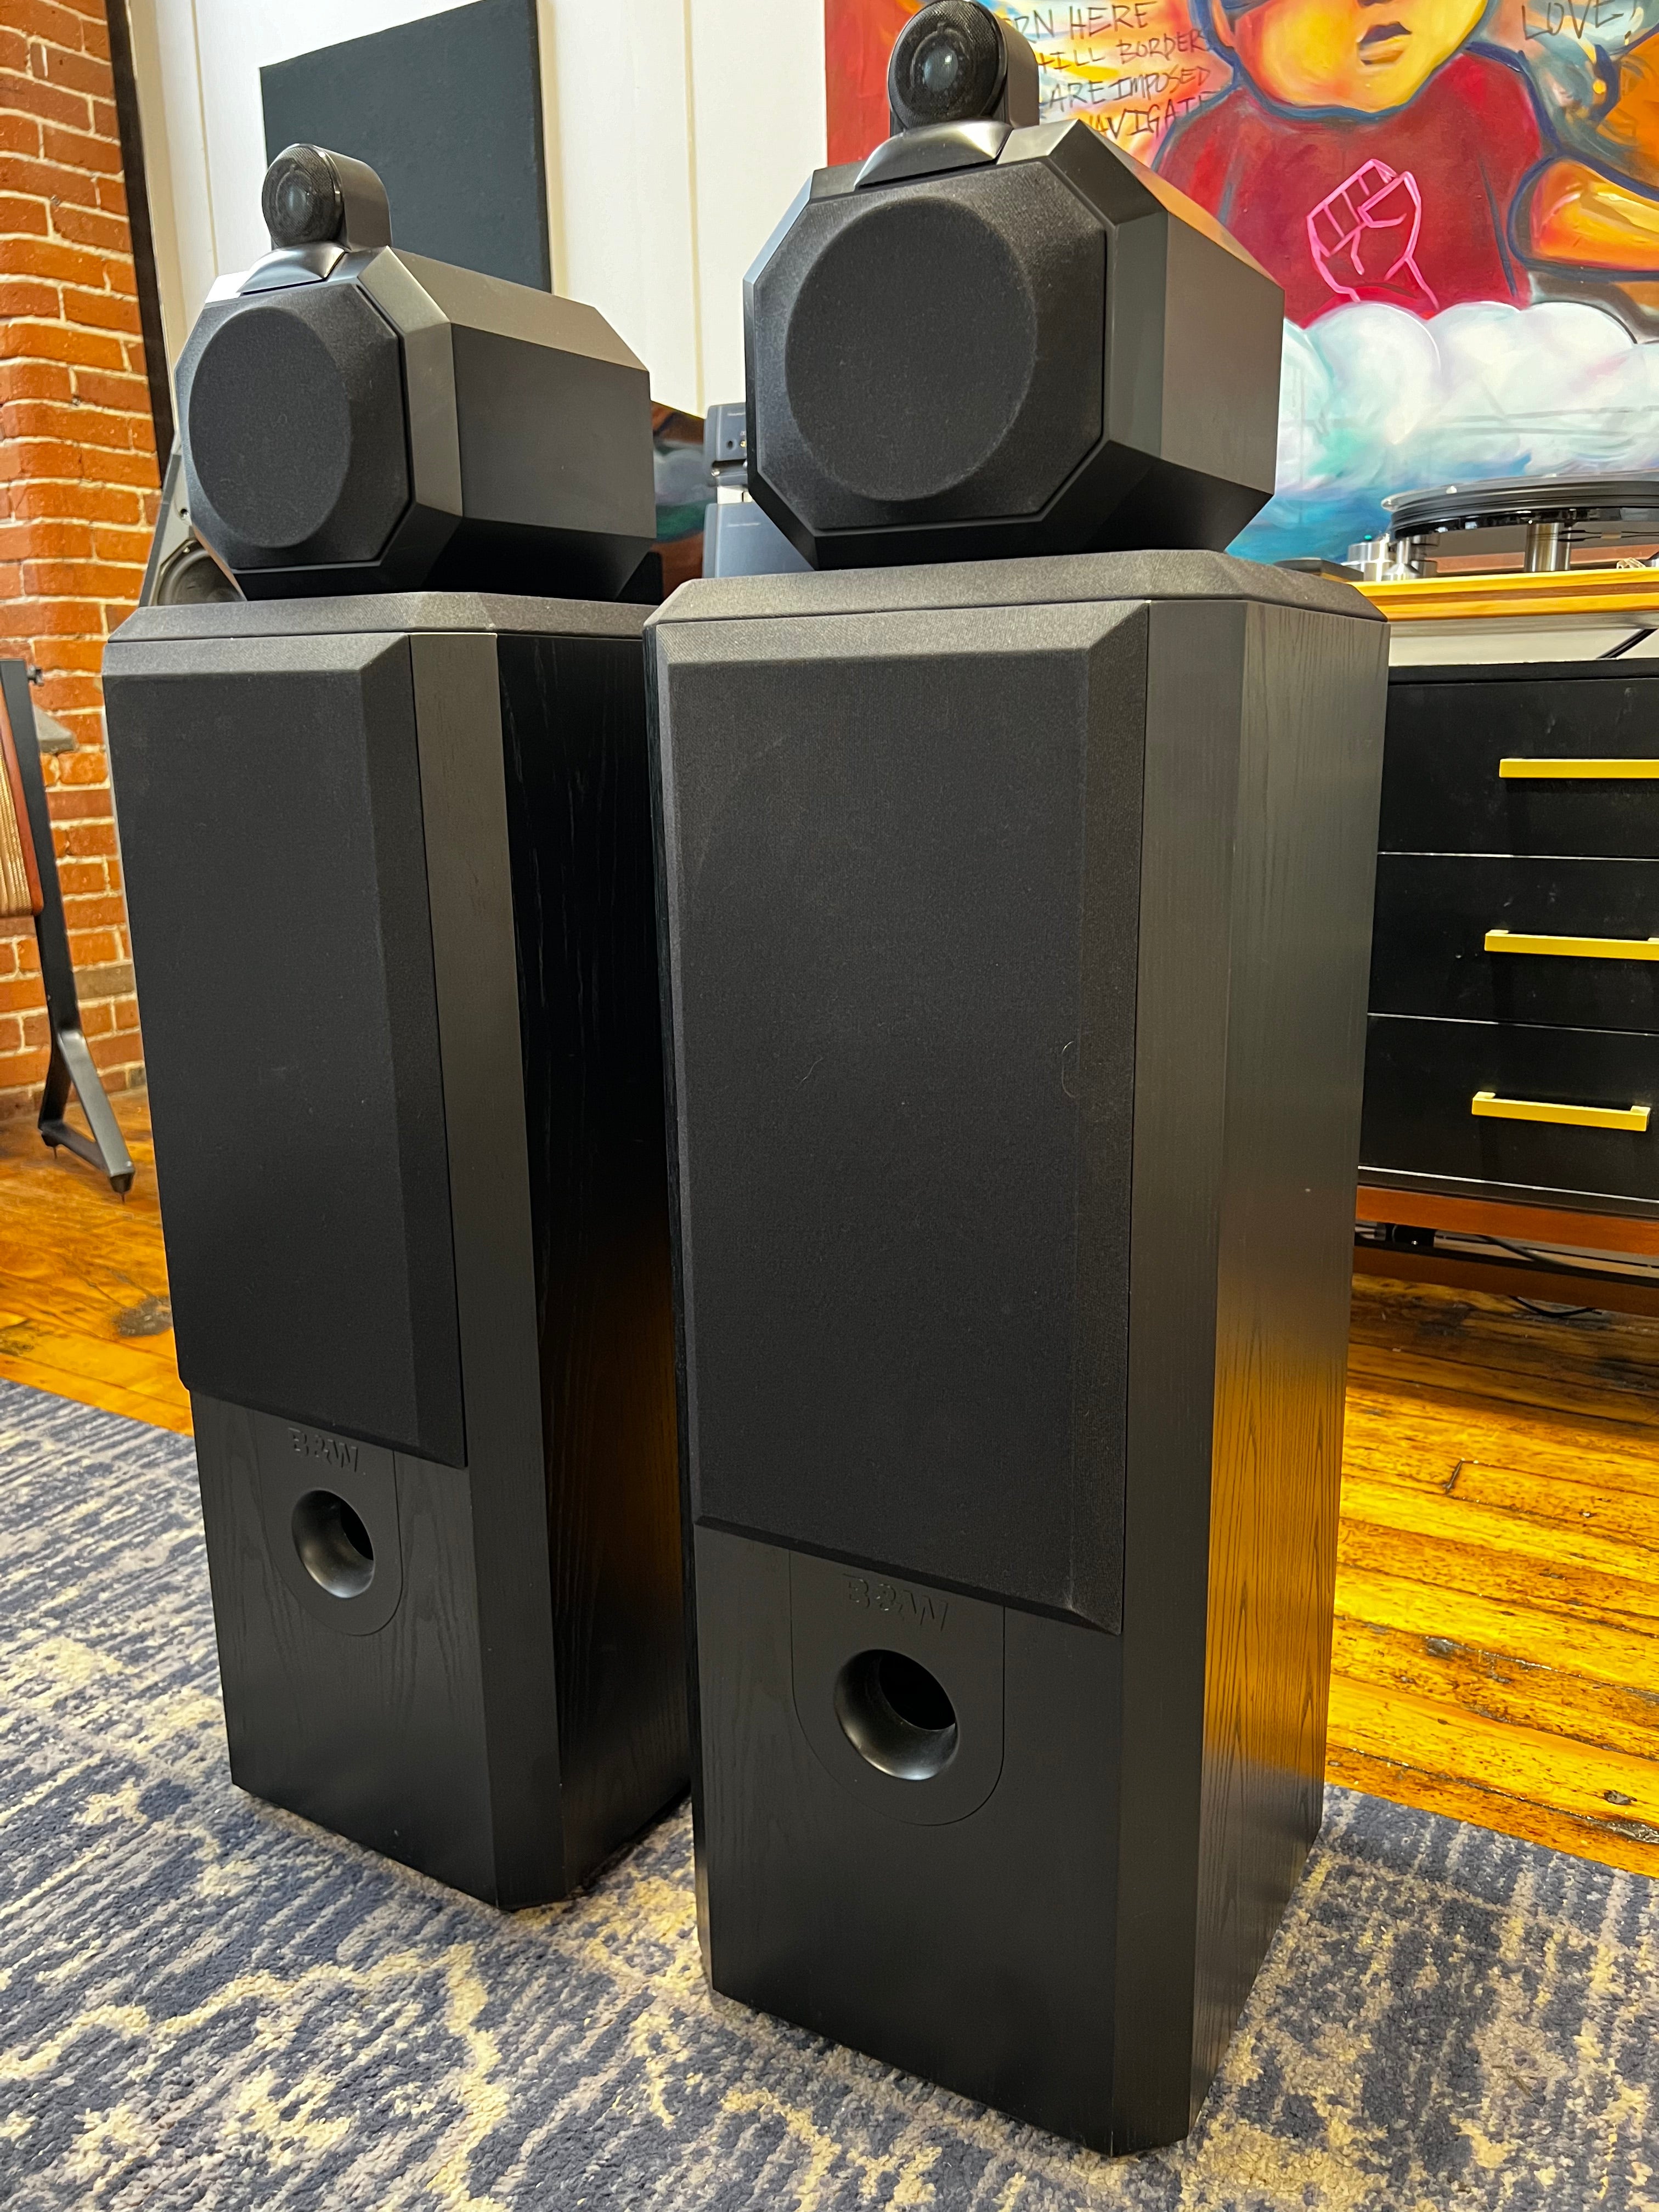 B&W 802 Series 3 Tower Speakers, Like New Condition